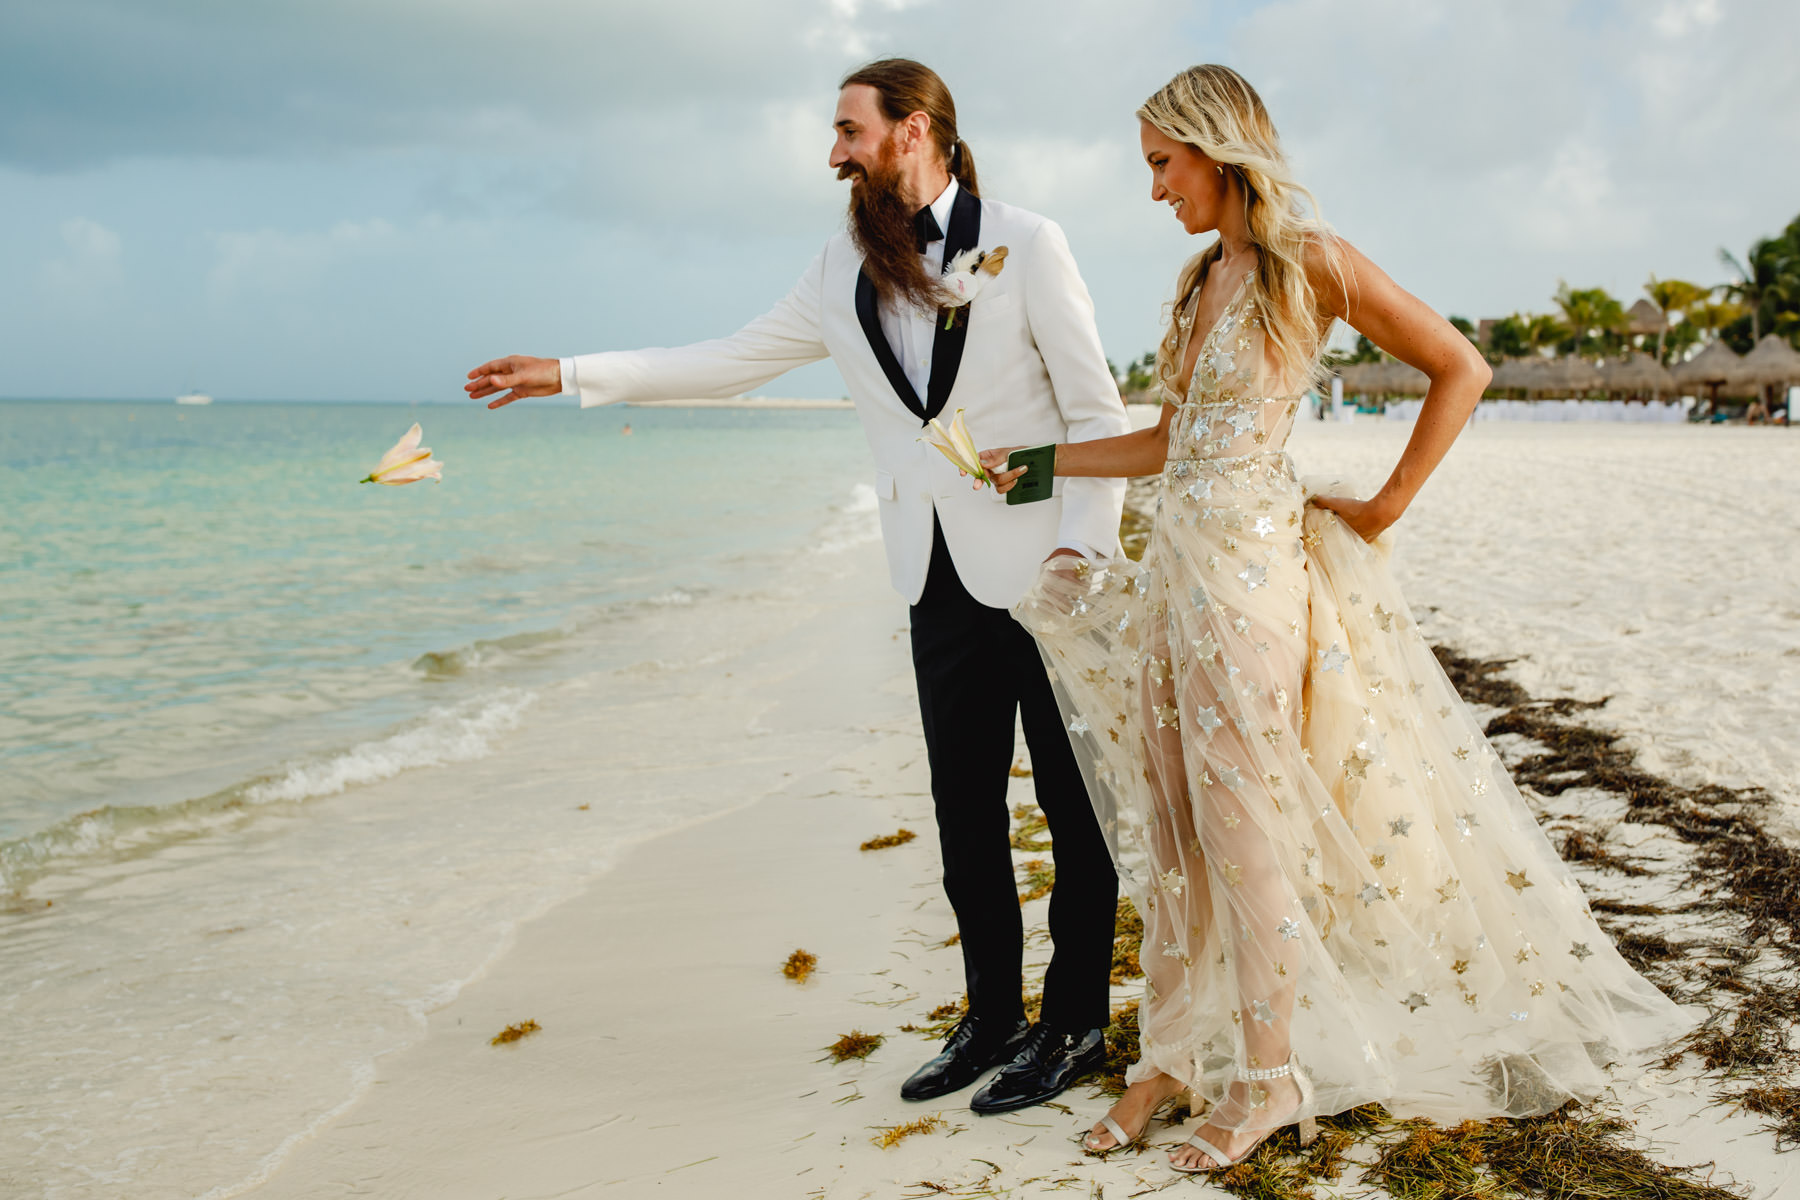 Lindsay and Joshua exchanging heartfelt vows against the backdrop of the shimmering ocean.